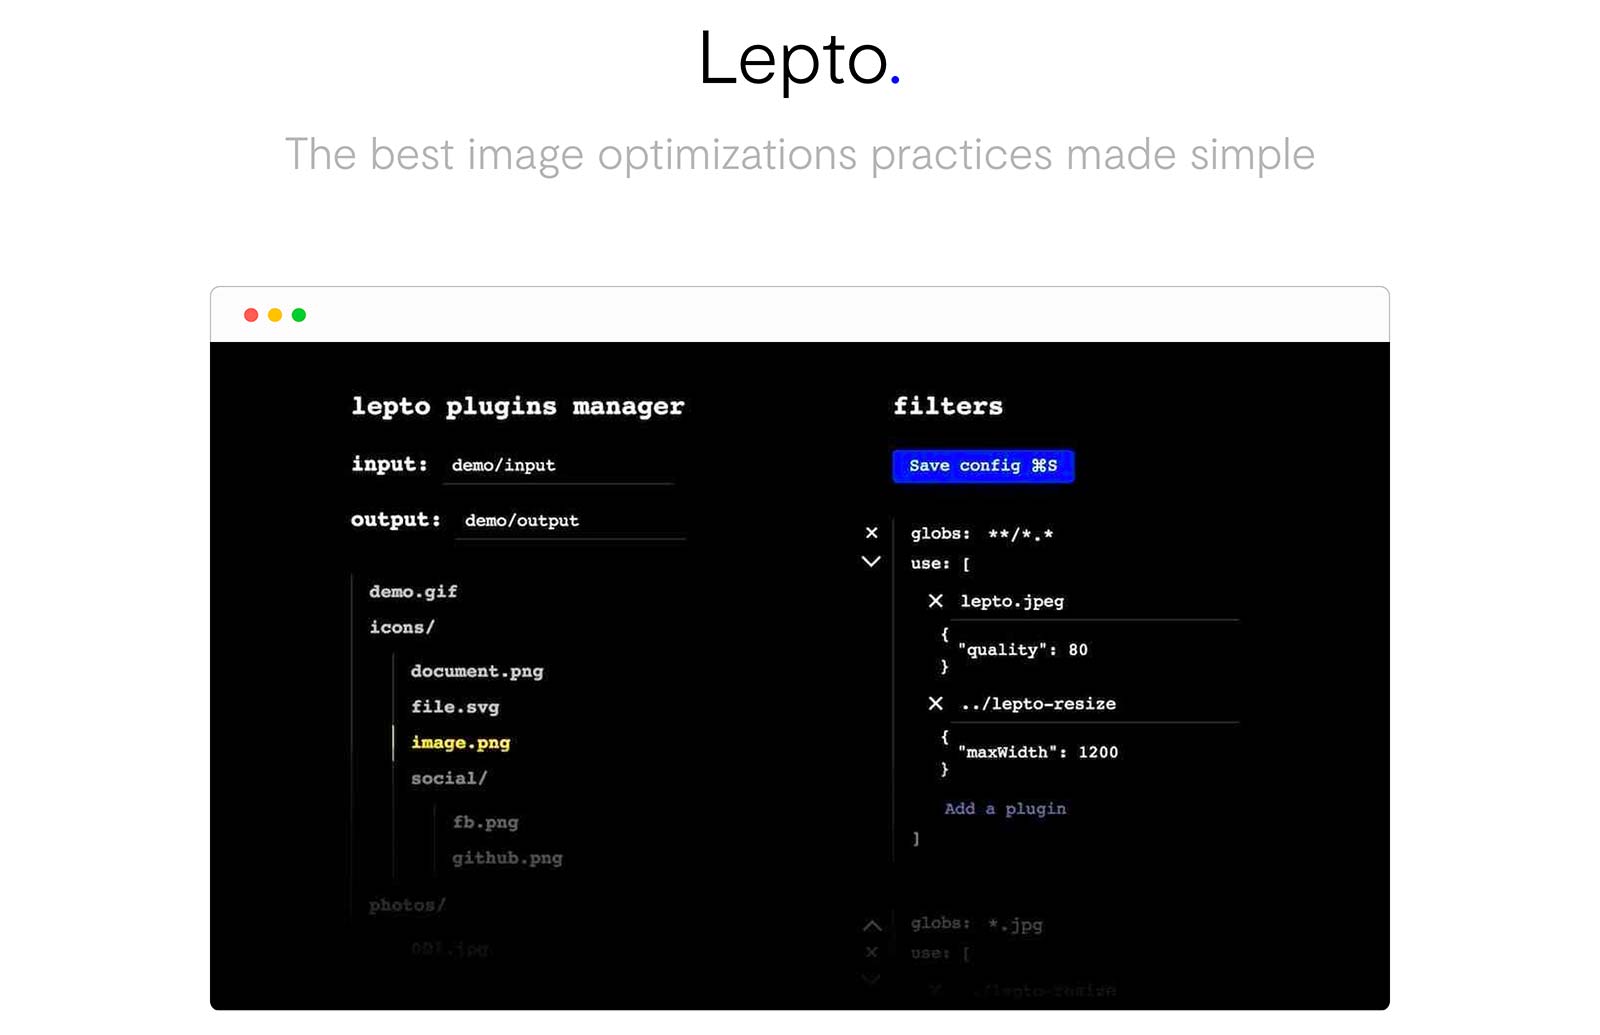 Lepto: The best image optimizations practices made simple